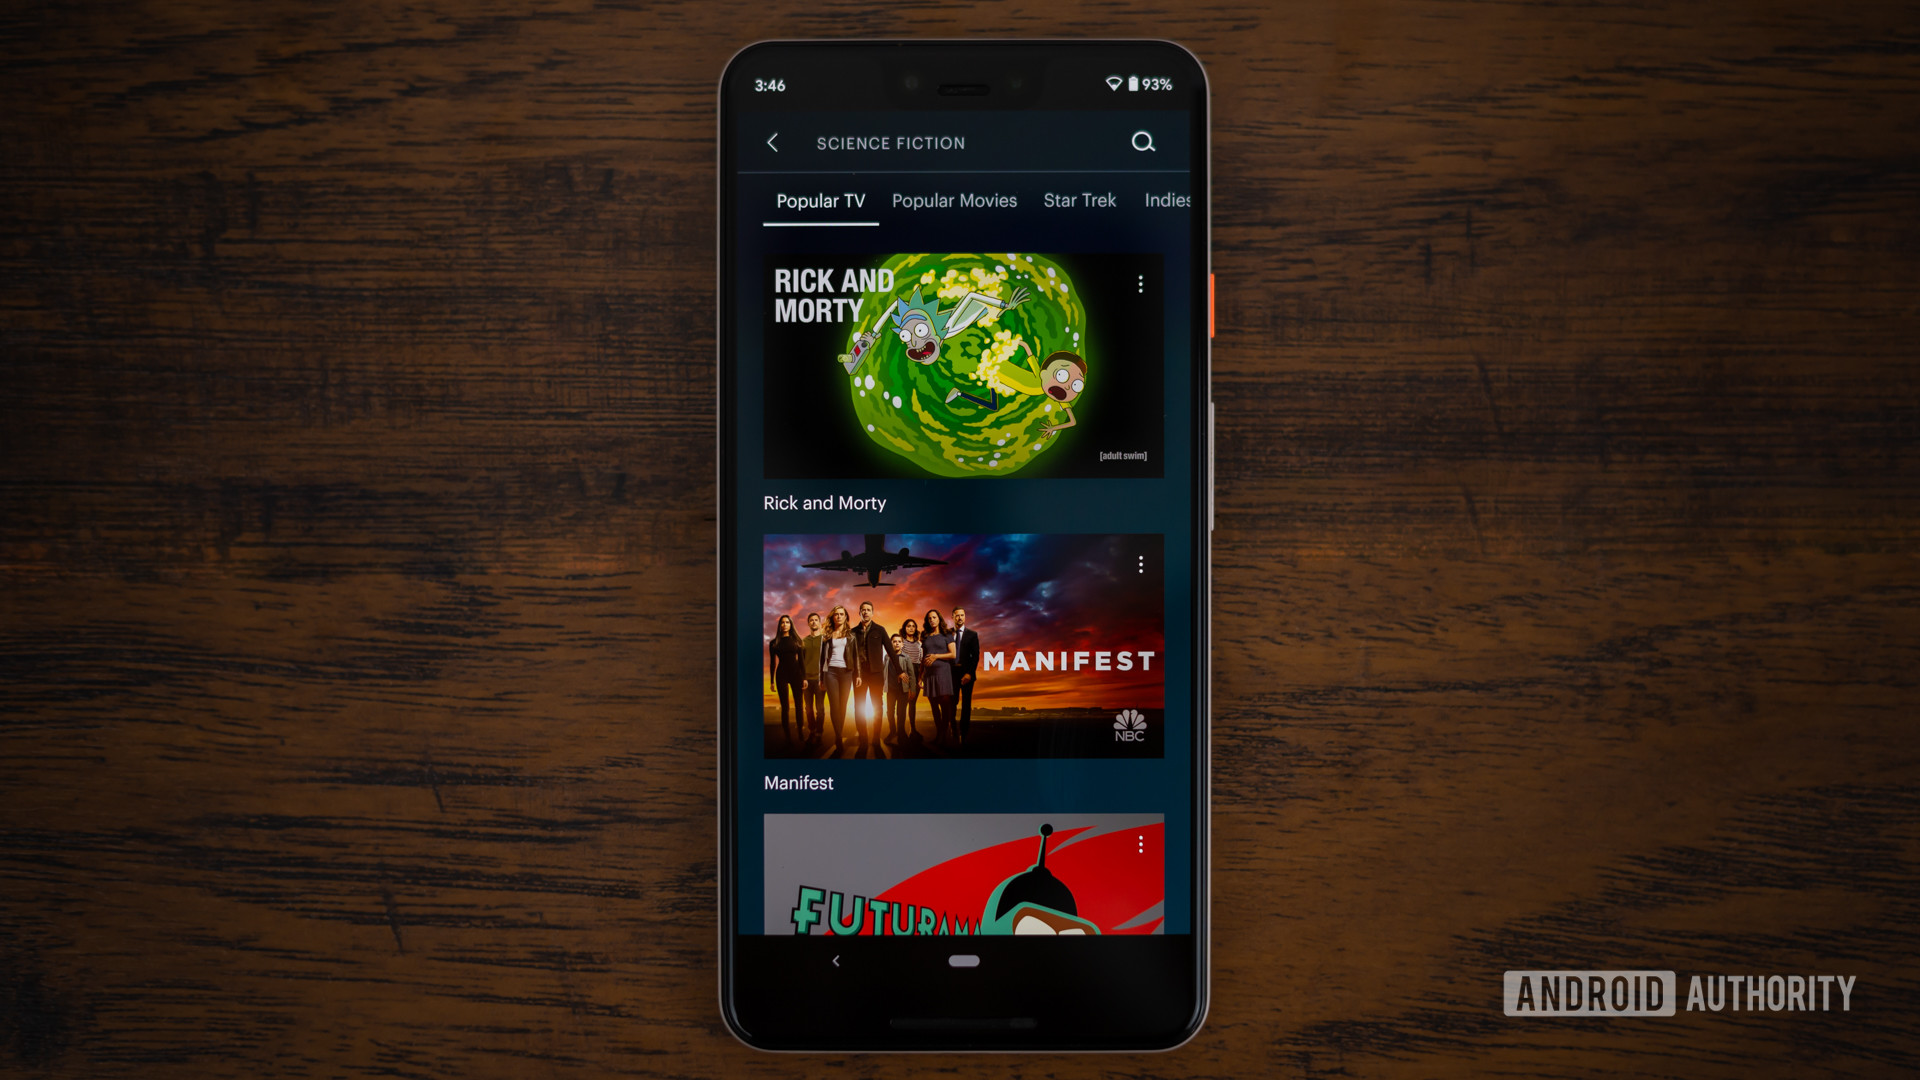 Hulu Science Fiction Section Displayed on Smartphone